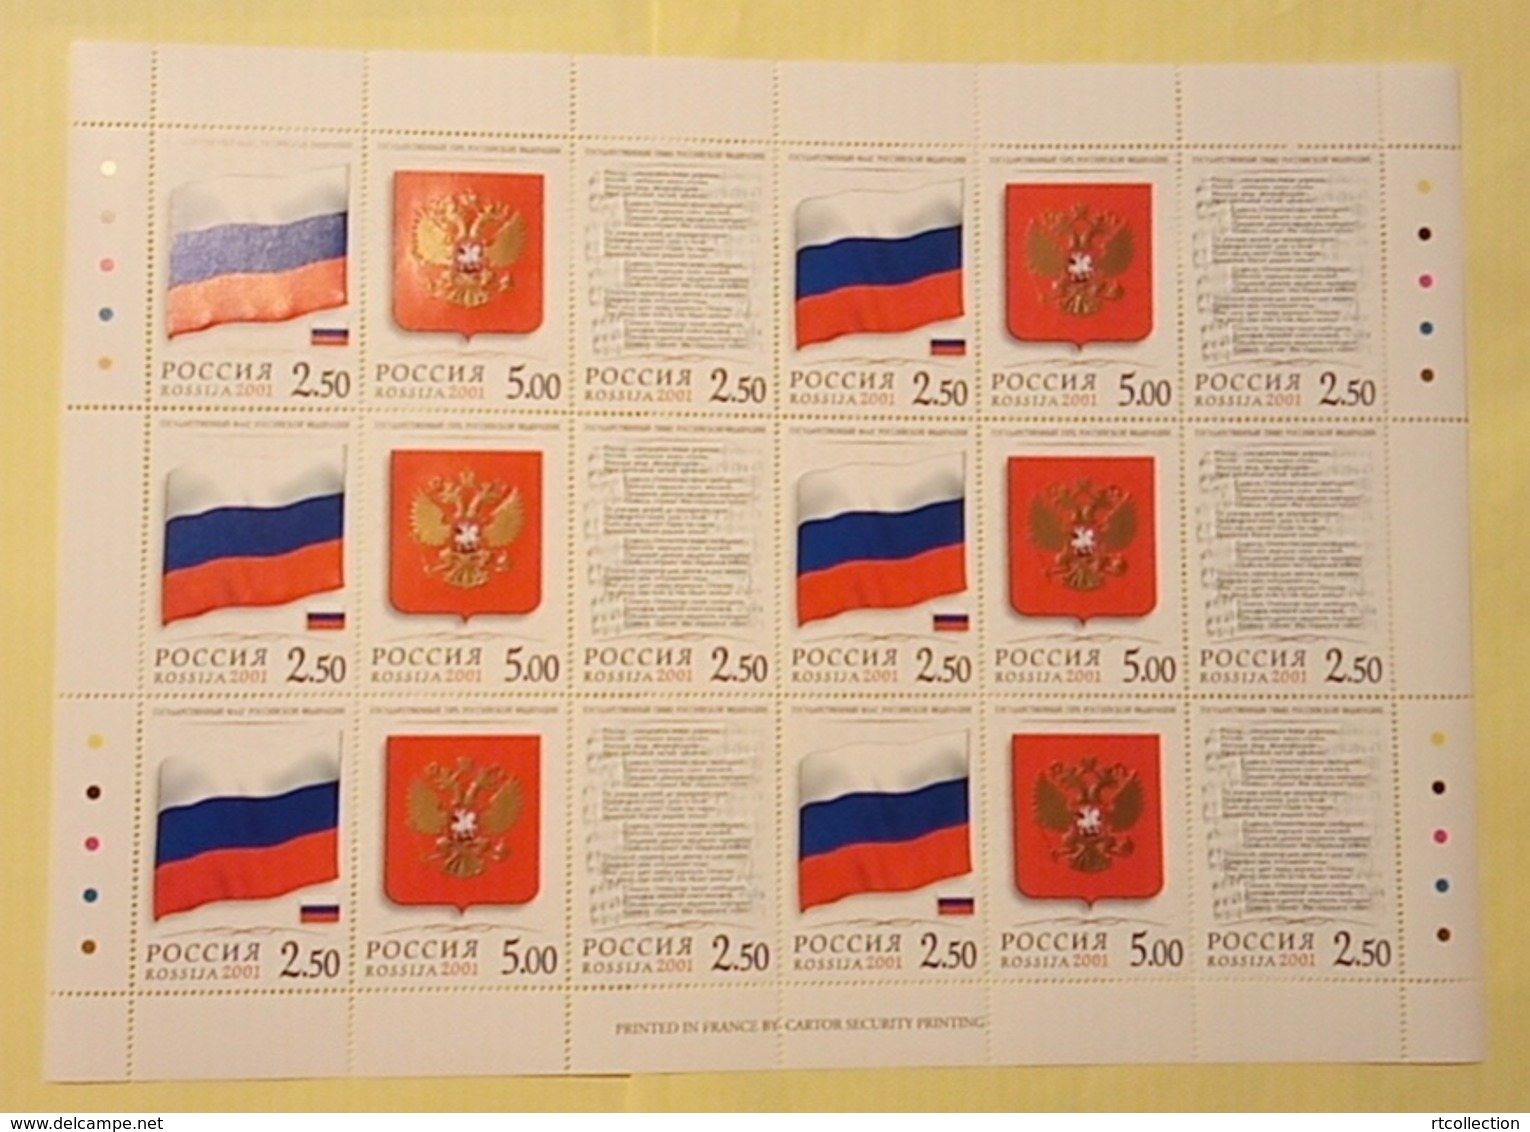 Russia 2001 Sheet State Emblems Of The Russian Federation Flags Anthem Arms Flag Emblem Symbols Michel 913A-915A - Feuilles Complètes